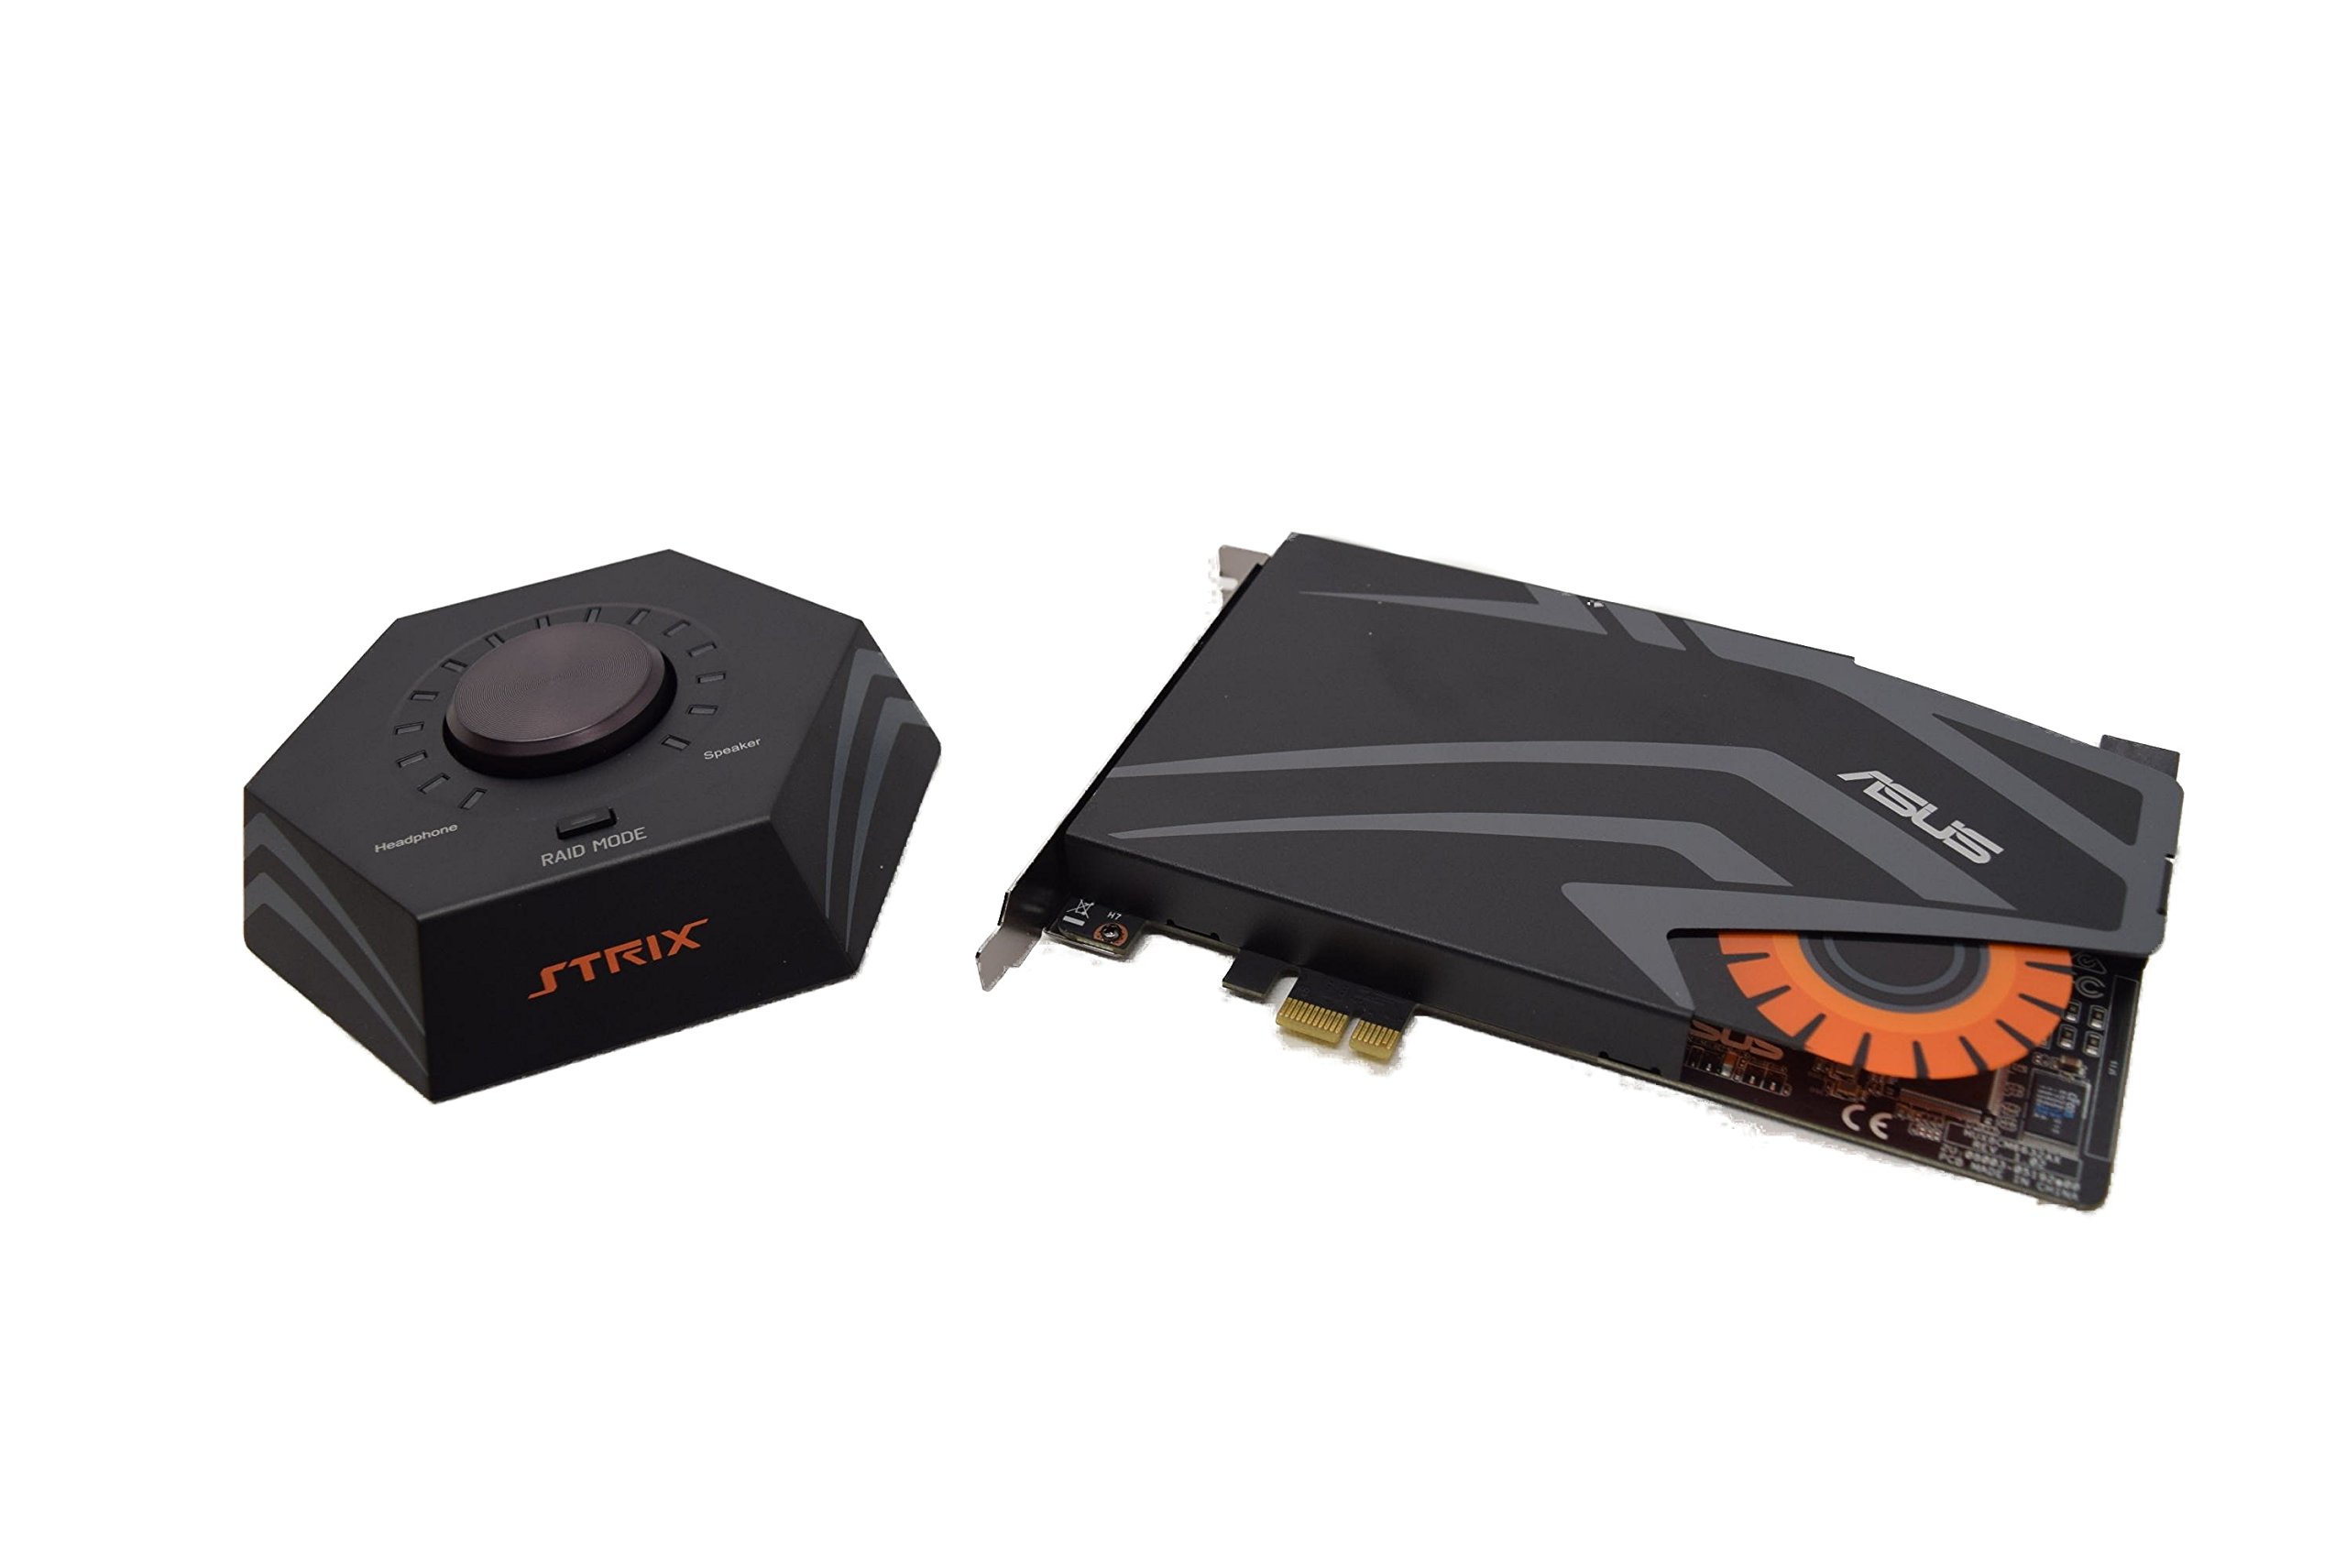 ASUS Strix RAID DLX 7.1 PCIe Gaming Sound Card with High Performance Headphone Amp (600ohm) & Audiophile-Grade DAC and 124dB SNR